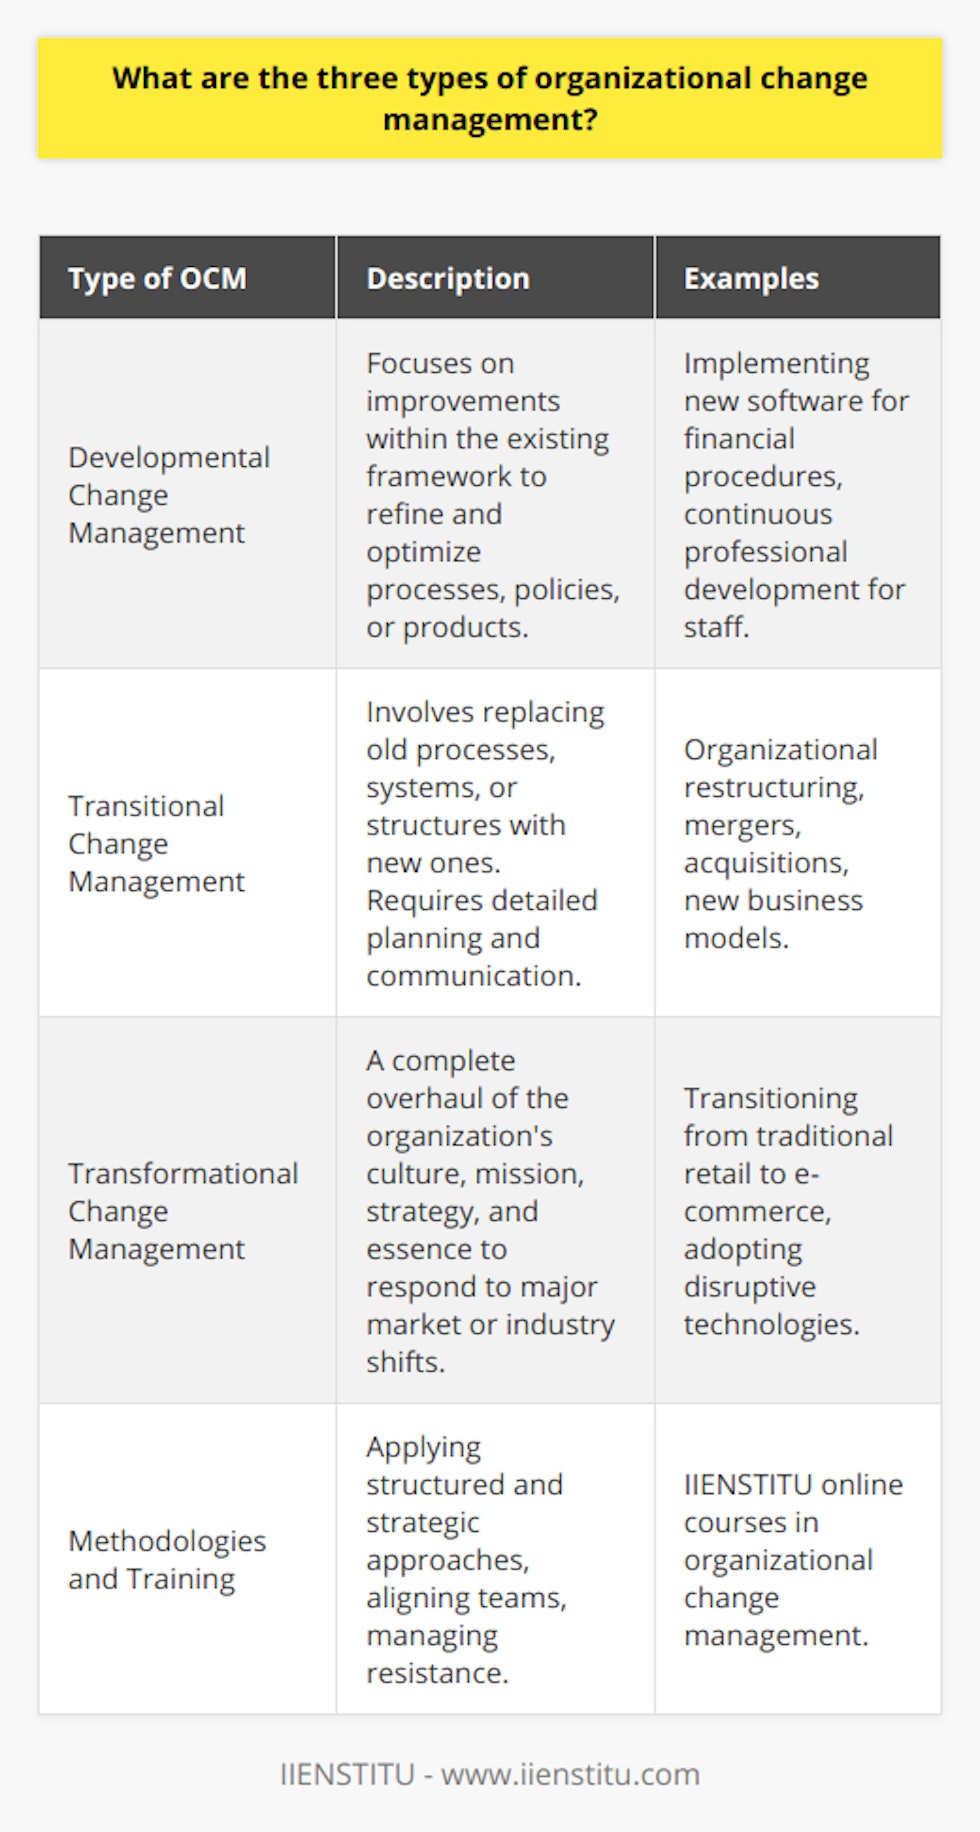 Organizational change management (OCM) is a crucial aspect of navigating businesses through the waters of transformation and ensuring that the intended outcomes are achieved efficiently. Understanding different kinds of organizational change is essential for any business leader or change manager.Developmental Change Management:Developmental change refers to improvements or enhancements made within an organization's existing framework. It does not involve a radical rethinking of operations but focuses on refining and optimizing processes, policies, or products. For example, a company might adopt a new software system to streamline existing financial procedures or introduce continuous professional development for staff to boost productivity and skill levels. During developmental changes, it's essential that employees see the logic behind the improvements and are given proper training to adapt to the new methods. This kind of change management is less intimidating for employees, as it builds on known elements rather than introducing entirely new concepts.Transitional Change Management:Transitional change is more complex than developmental change as it involves replacing existing processes, systems, or structures with something entirely new. These changes can create significant disruption as the organization shifts from one state to another. Examples of transitional change include organizational restructuring, mergers, acquisitions, or the implementation of new business models. Transitional change often requires detailed planning, a clear timeline, and considerable resources. As such changes can be unsettling for employees, it’s crucial to maintain open lines of communication to address concerns and provide reassurance during the shift.Transformational Change Management:Transformational change is the most profound and challenging type of organizational change. It requires a complete overhaul of the organization’s culture, mission, strategy, and often its very essence. Transformational changes are driven by the need to respond to massive shifts in the marketplace or industry, disruptive technologies, or a redefinition of business goals. For instance, a traditional retail company might need to transform itself into an e-commerce driven entity to survive in a digital economy. Such radical changes demand strong leadership, a compelling vision for the future, and a comprehensive strategy that is communicated clearly to all stakeholders. Transformational change management involves fundamentally altering the organization's DNA and requires employees to let go of old identities and embrace a new corporate ethos.To effectively manage these different types of change, there are specific methodologies and disciplines, such as those taught by IIENSTITU, which focuses on providing high-quality online courses in various fields including organizational change management. By applying principles learned from these courses, change leaders can ensure that they approach change in a structured and strategic manner, aligning their teams and managing resistance along the way. Whether through developmental, transitional, or transformational change management, the core objectives remain to minimize the discomfort, facilitate the transition, and achieve the desired state with as much participation and as little disruption as possible.